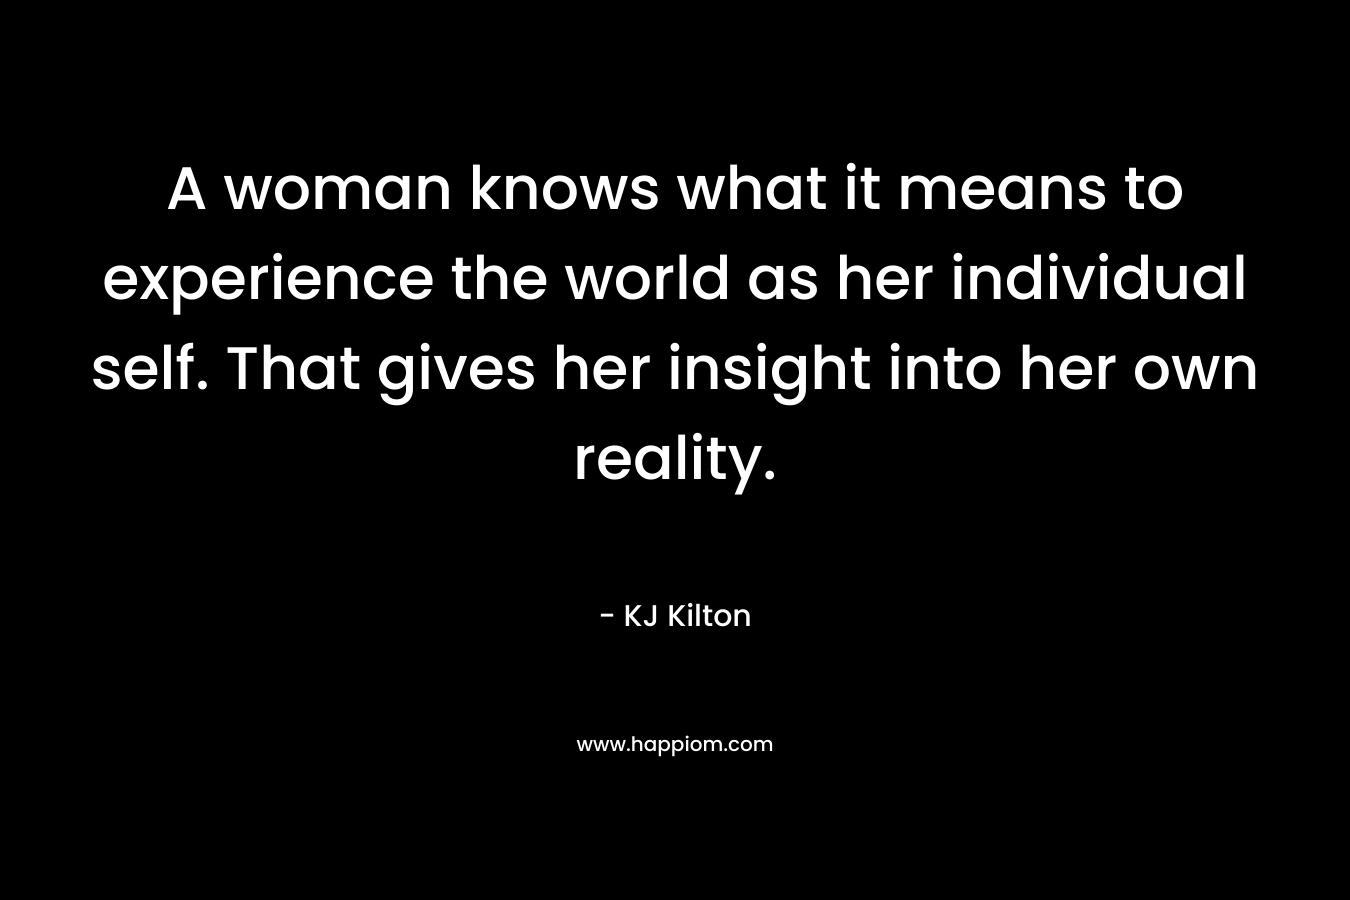 A woman knows what it means to experience the world as her individual self. That gives her insight into her own reality. – KJ Kilton